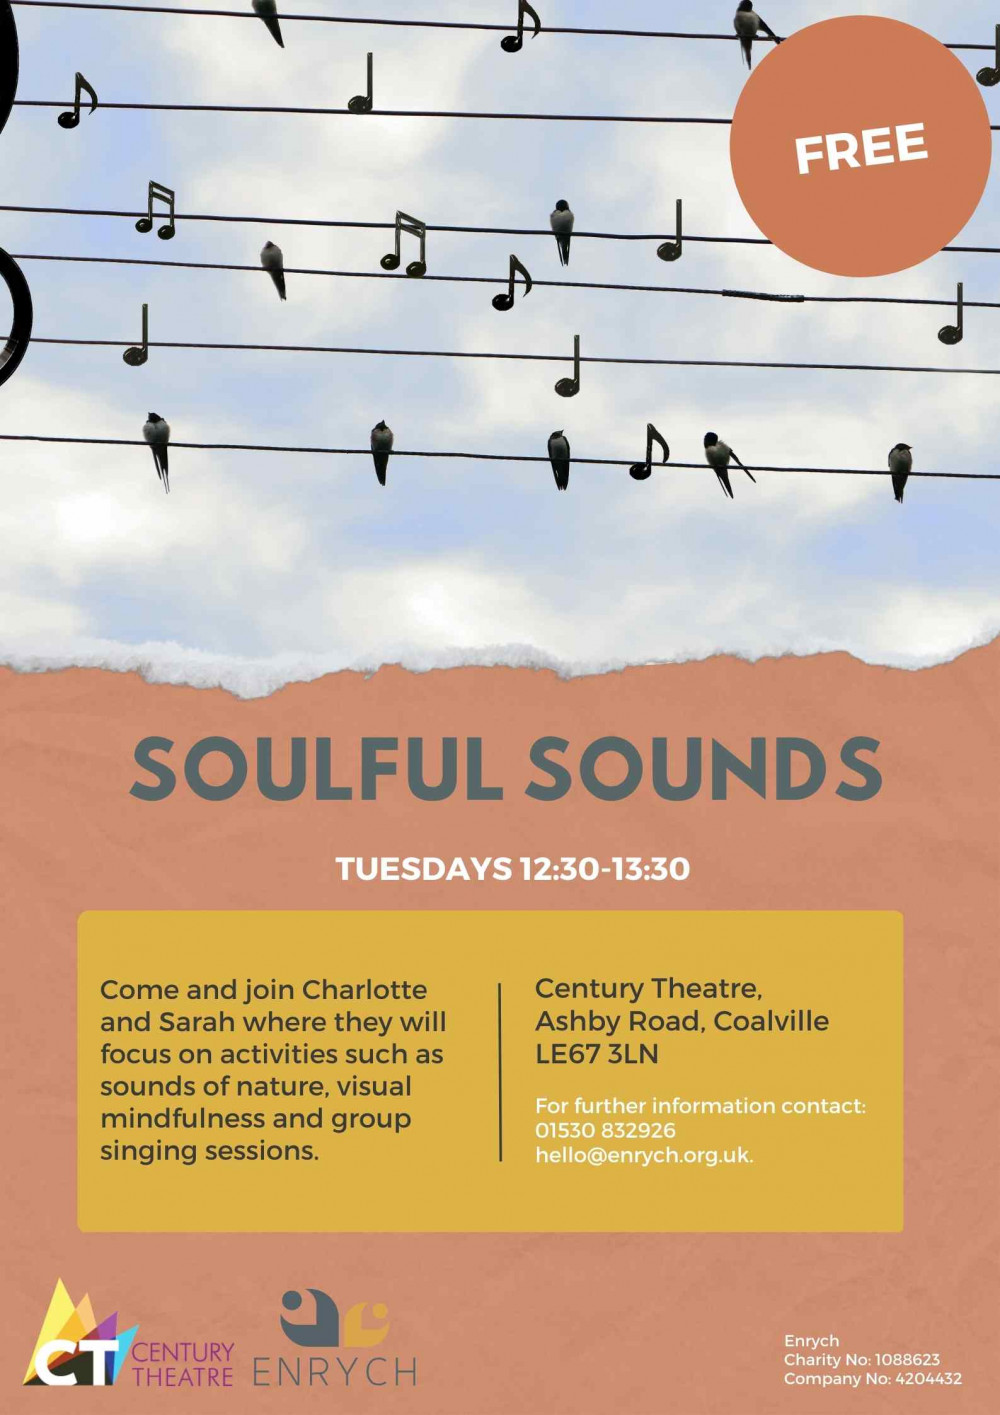 Soulful Sounds at the Century Theatre, Ashby Road, Coalville, Leicestershire